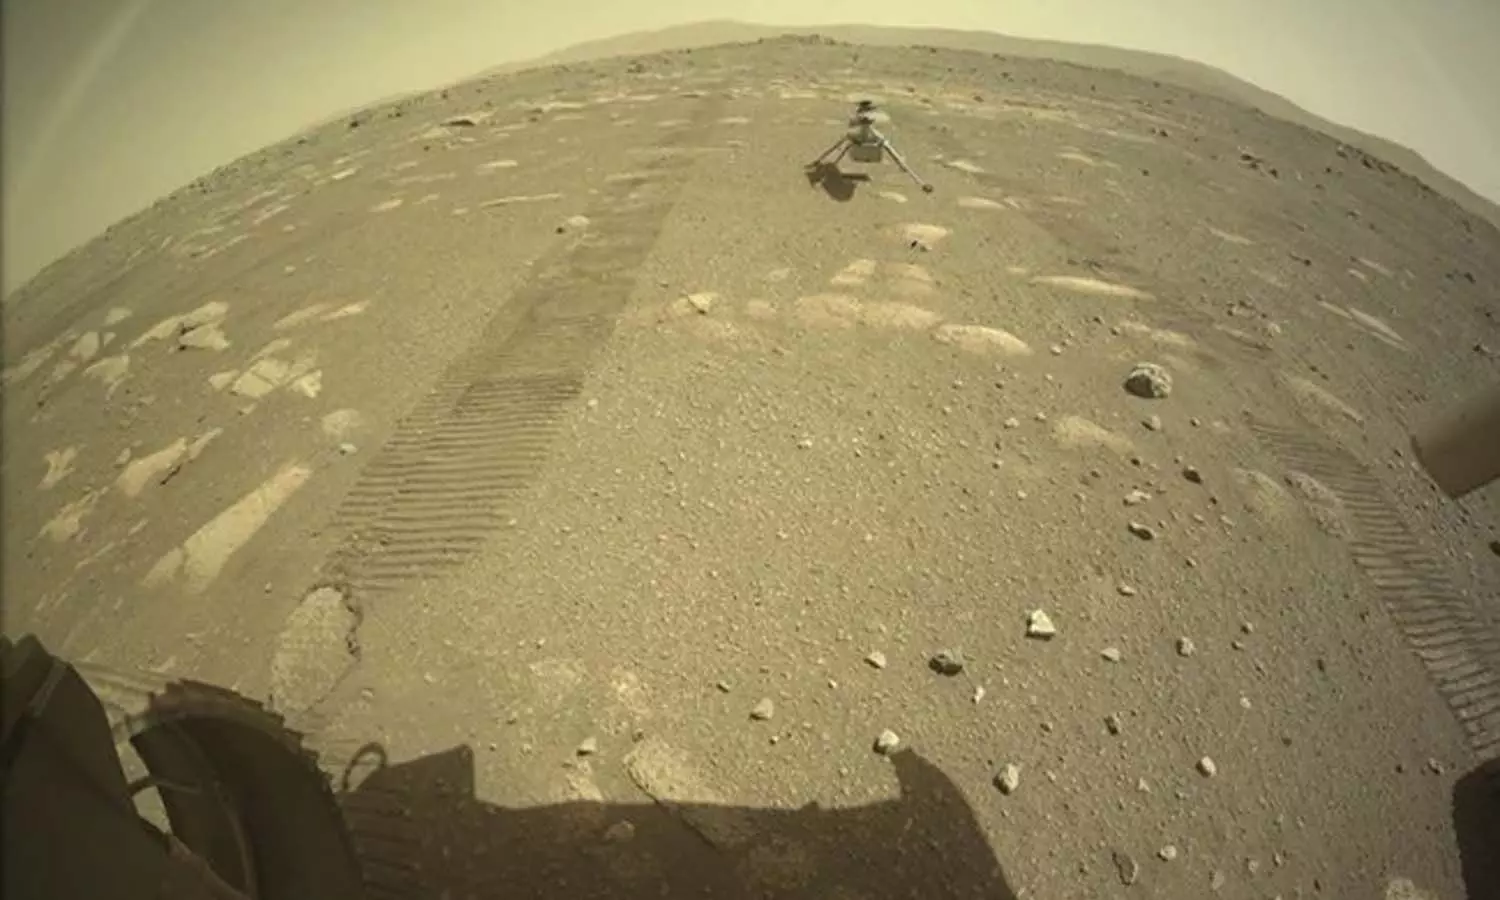 Helicopter land on Mars